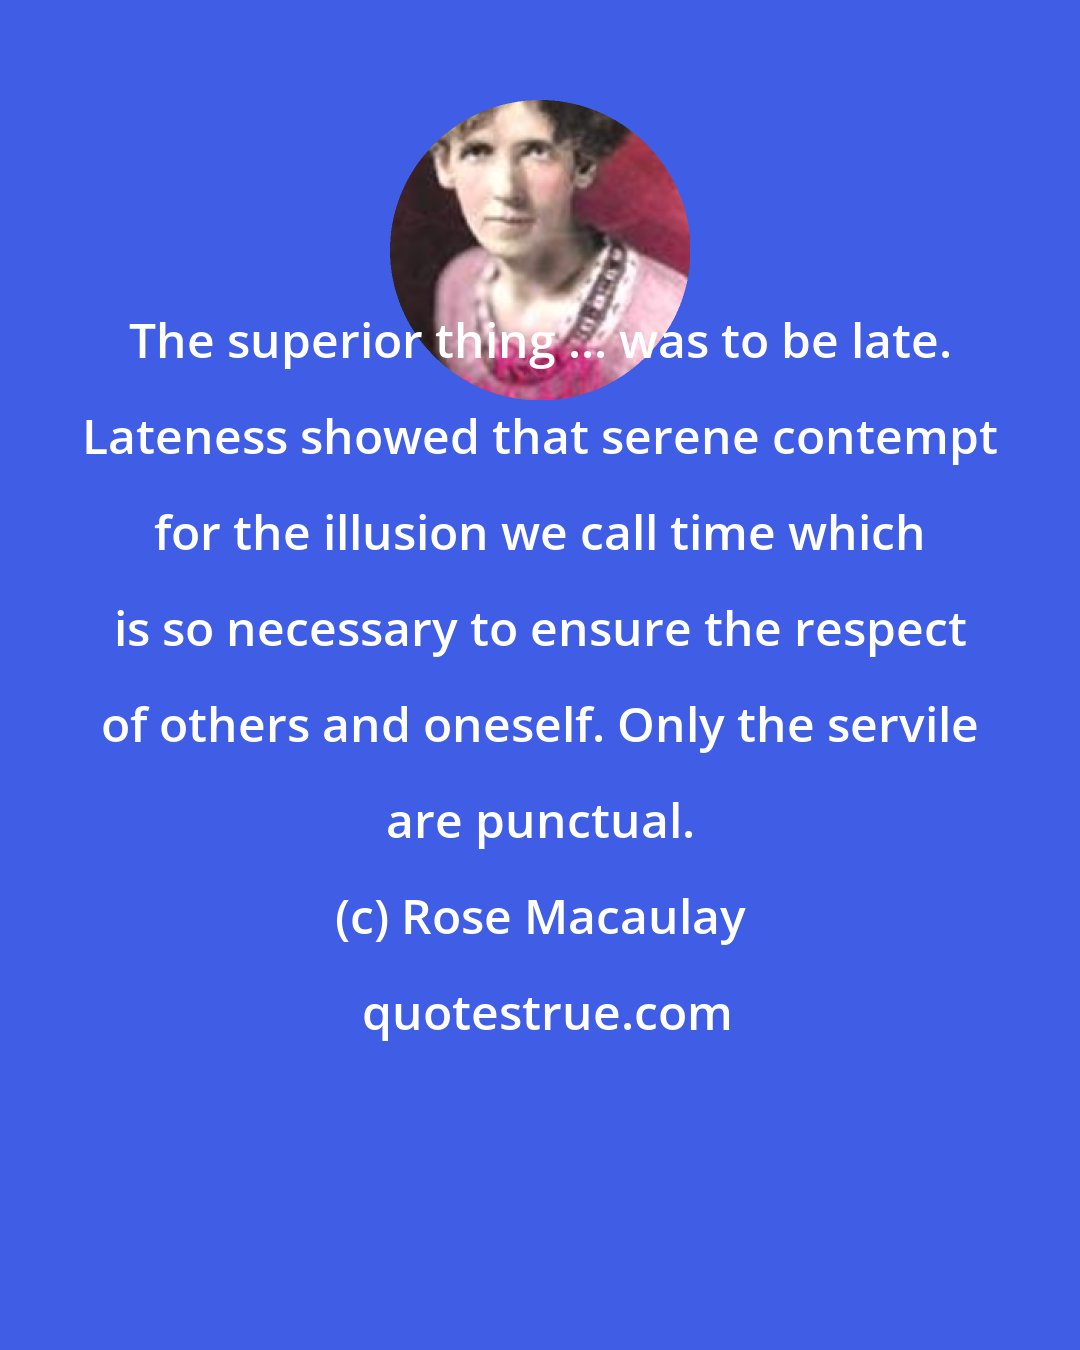 Rose Macaulay: The superior thing ... was to be late. Lateness showed that serene contempt for the illusion we call time which is so necessary to ensure the respect of others and oneself. Only the servile are punctual.